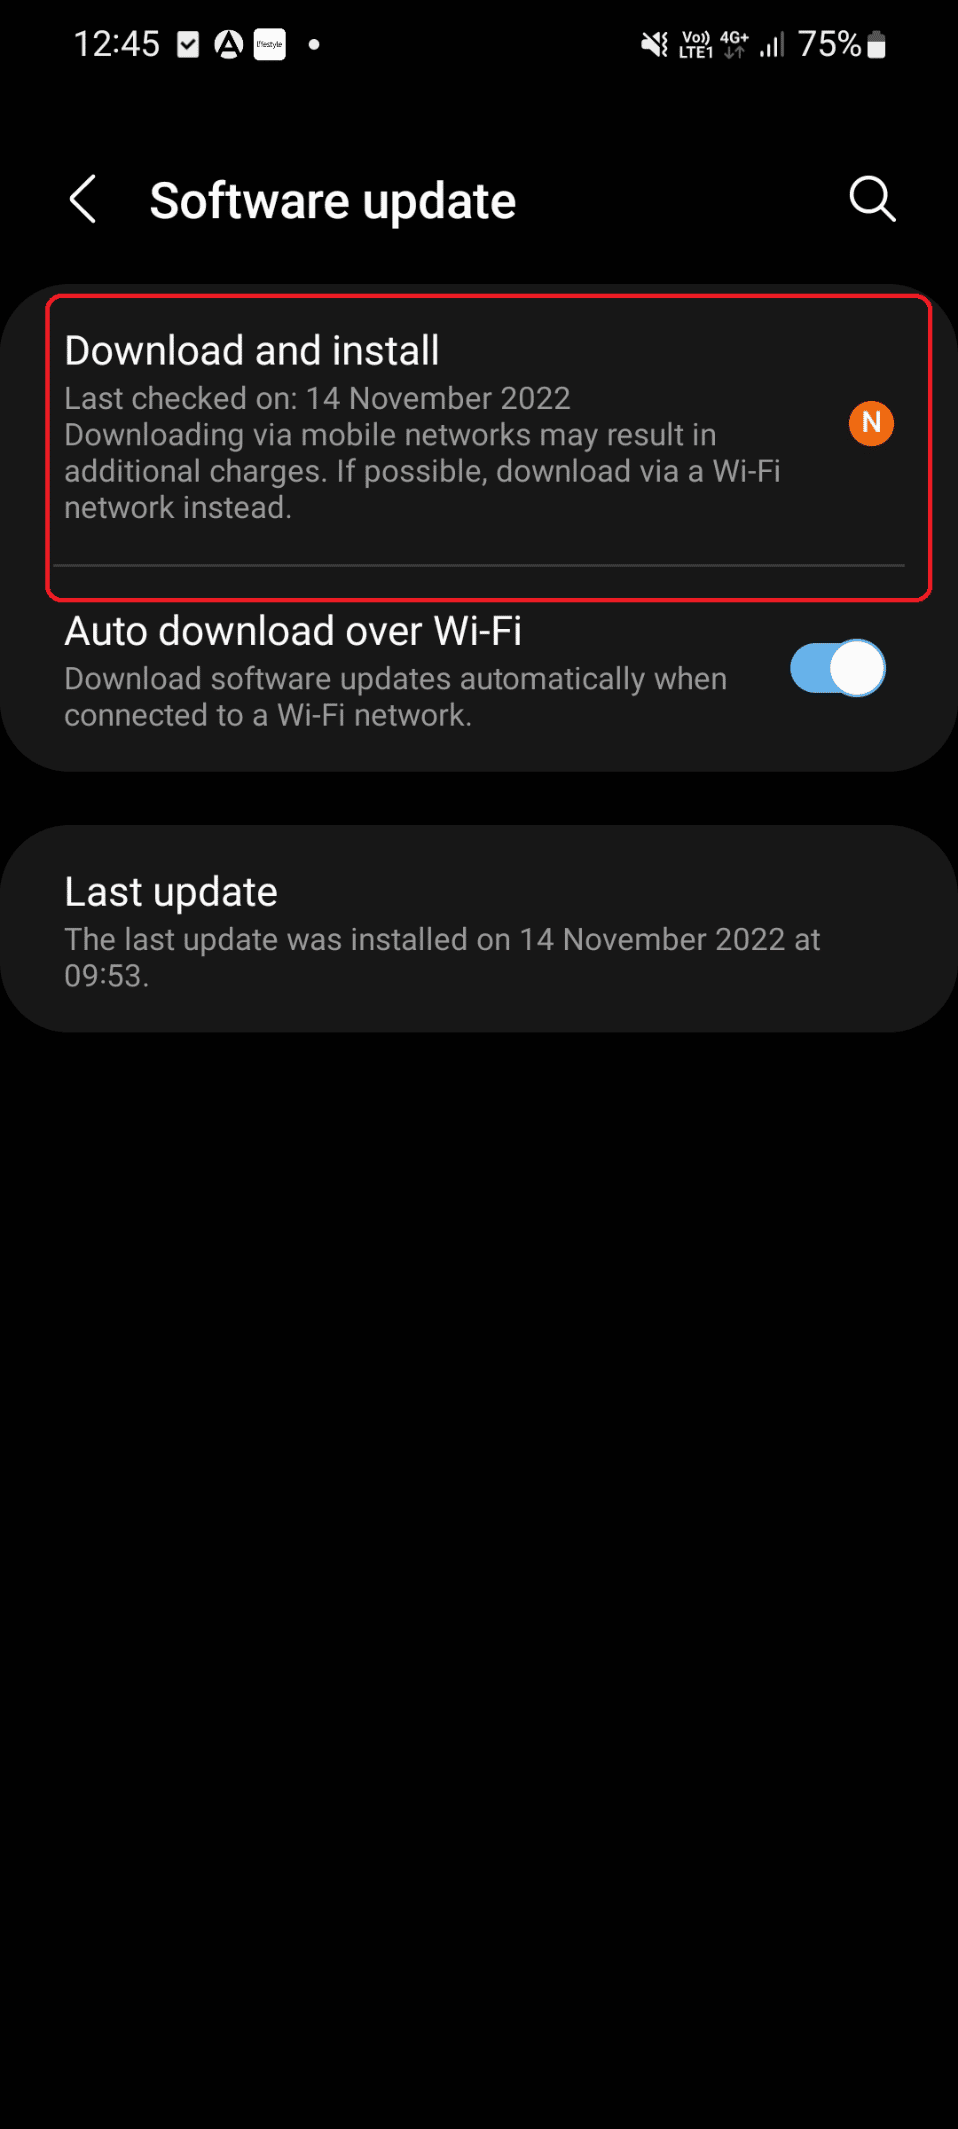 download and install option